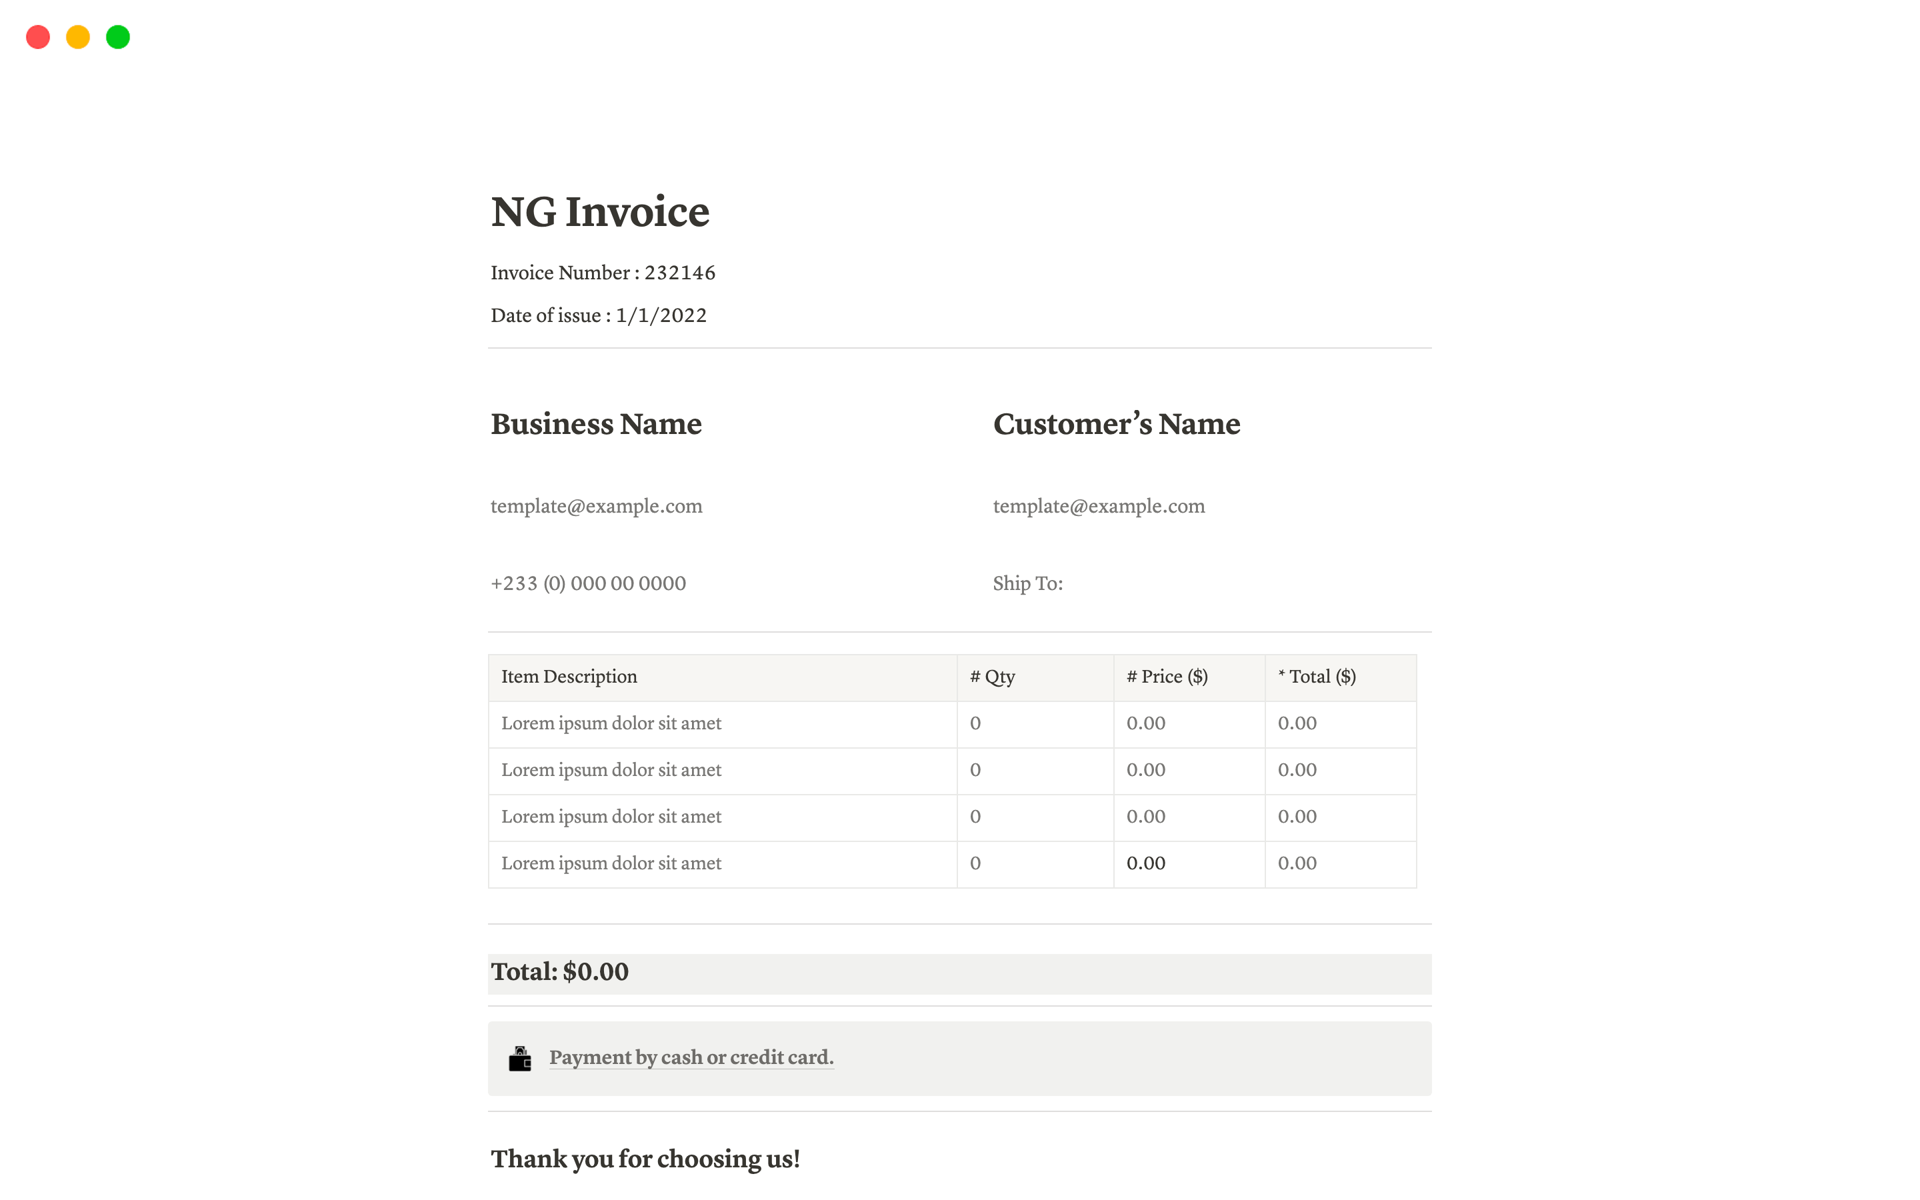 NotionGrowth Invoice template is designed minimalistic to help you trade your product with receipts of transactions.